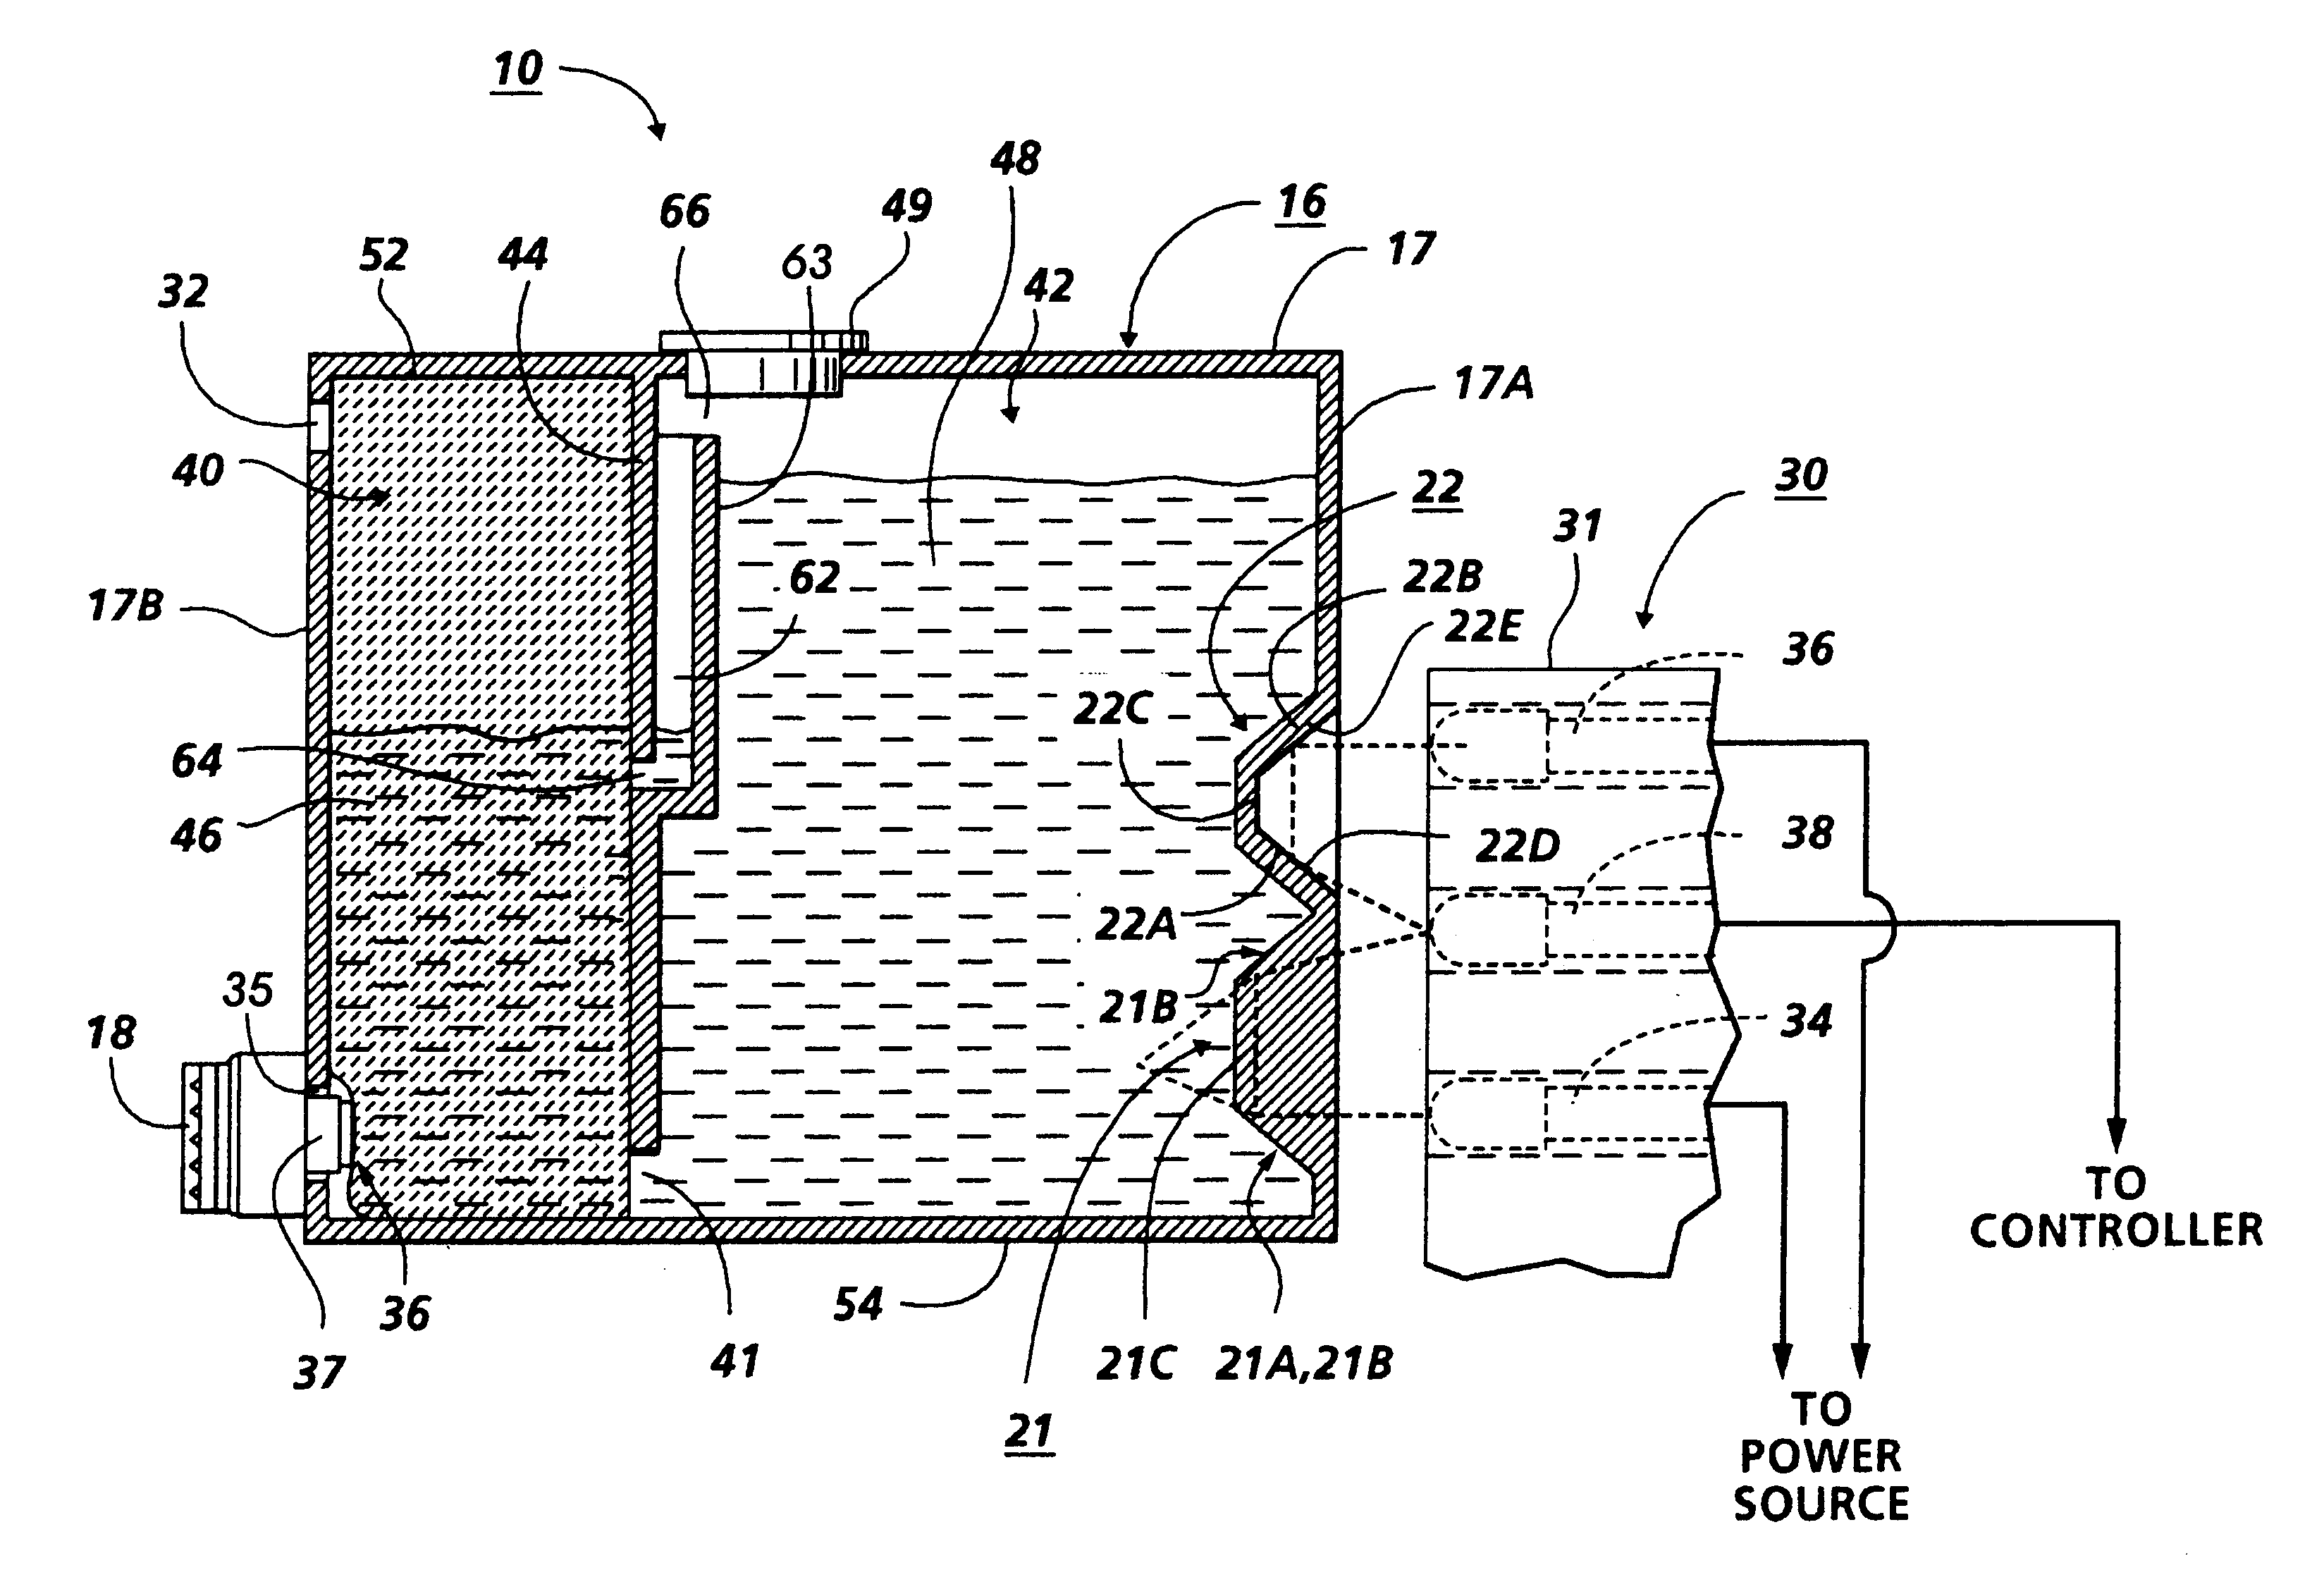 Sensing system for detecting presence of an ink container and level of ink therein